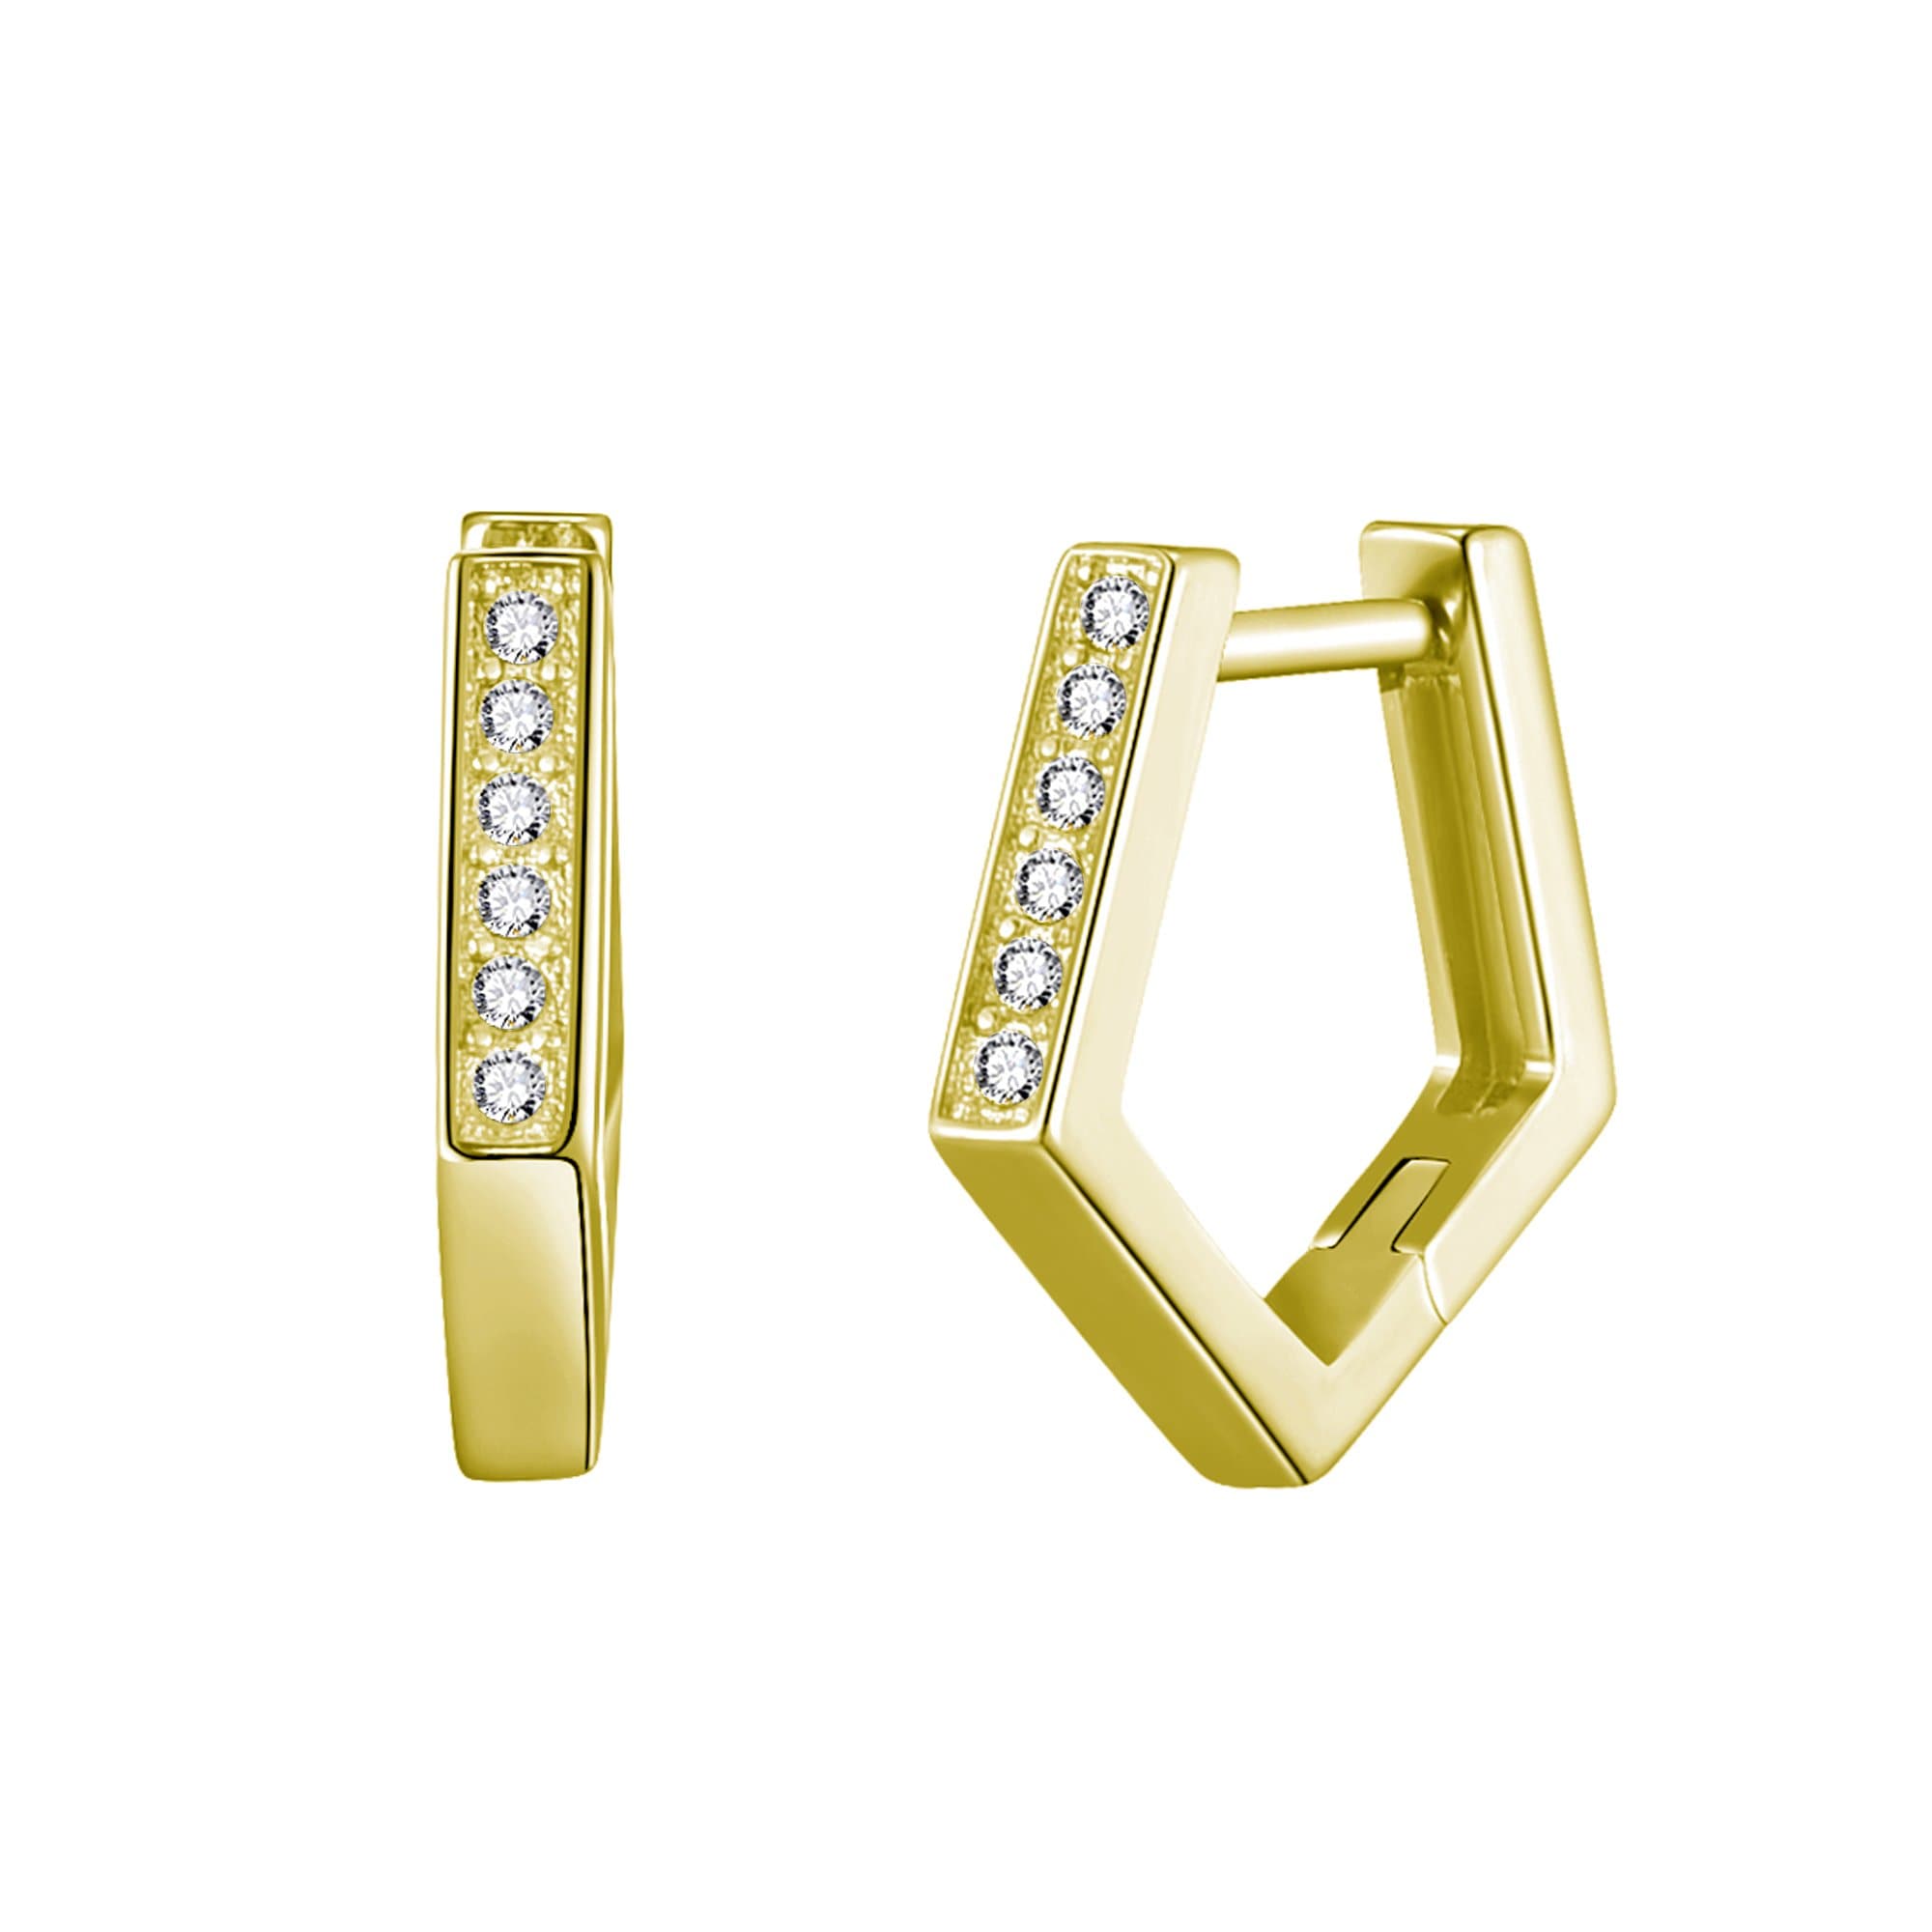 Gold Plated Geometric Hoop Earrings Created with Zircondia® Crystals